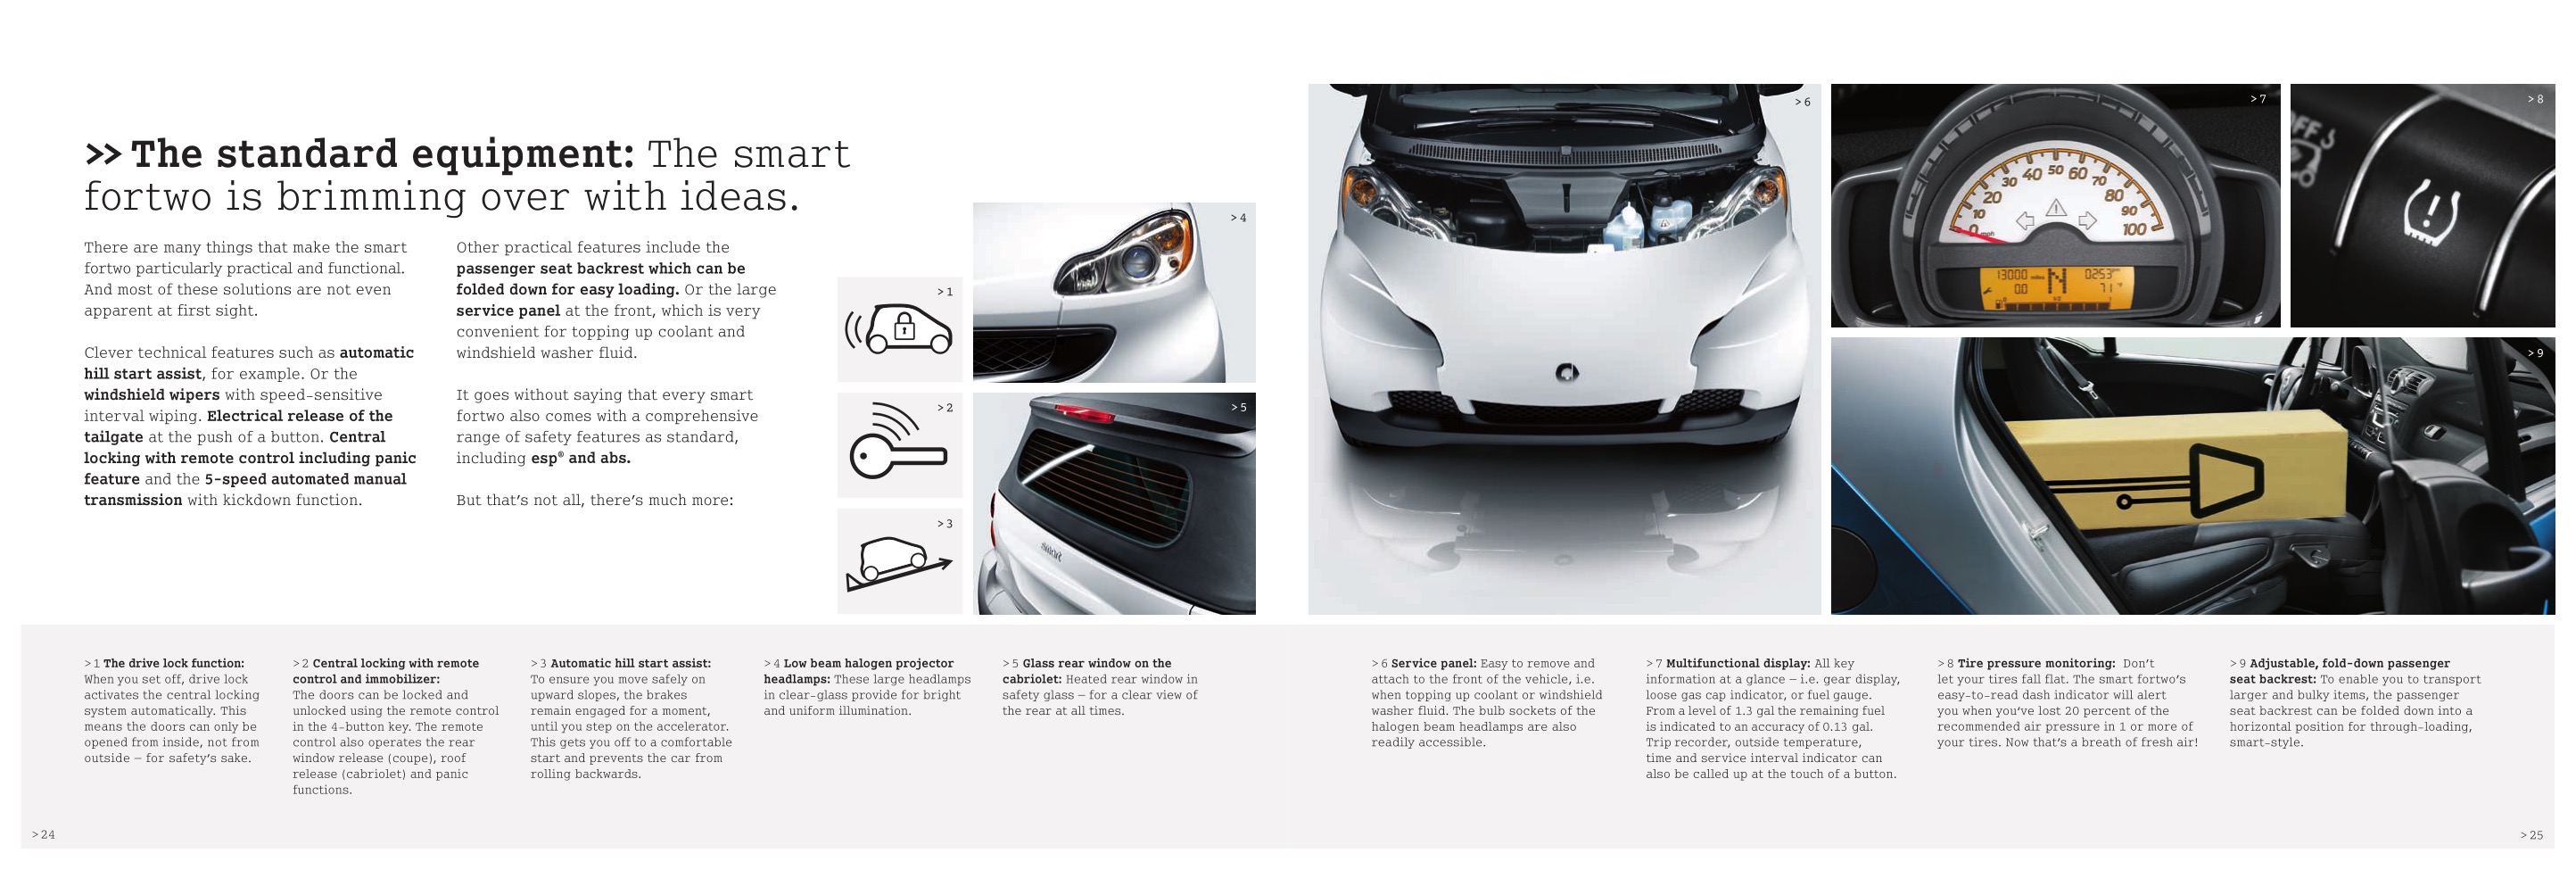 2009 Smart Fortwo Brochure Page 15